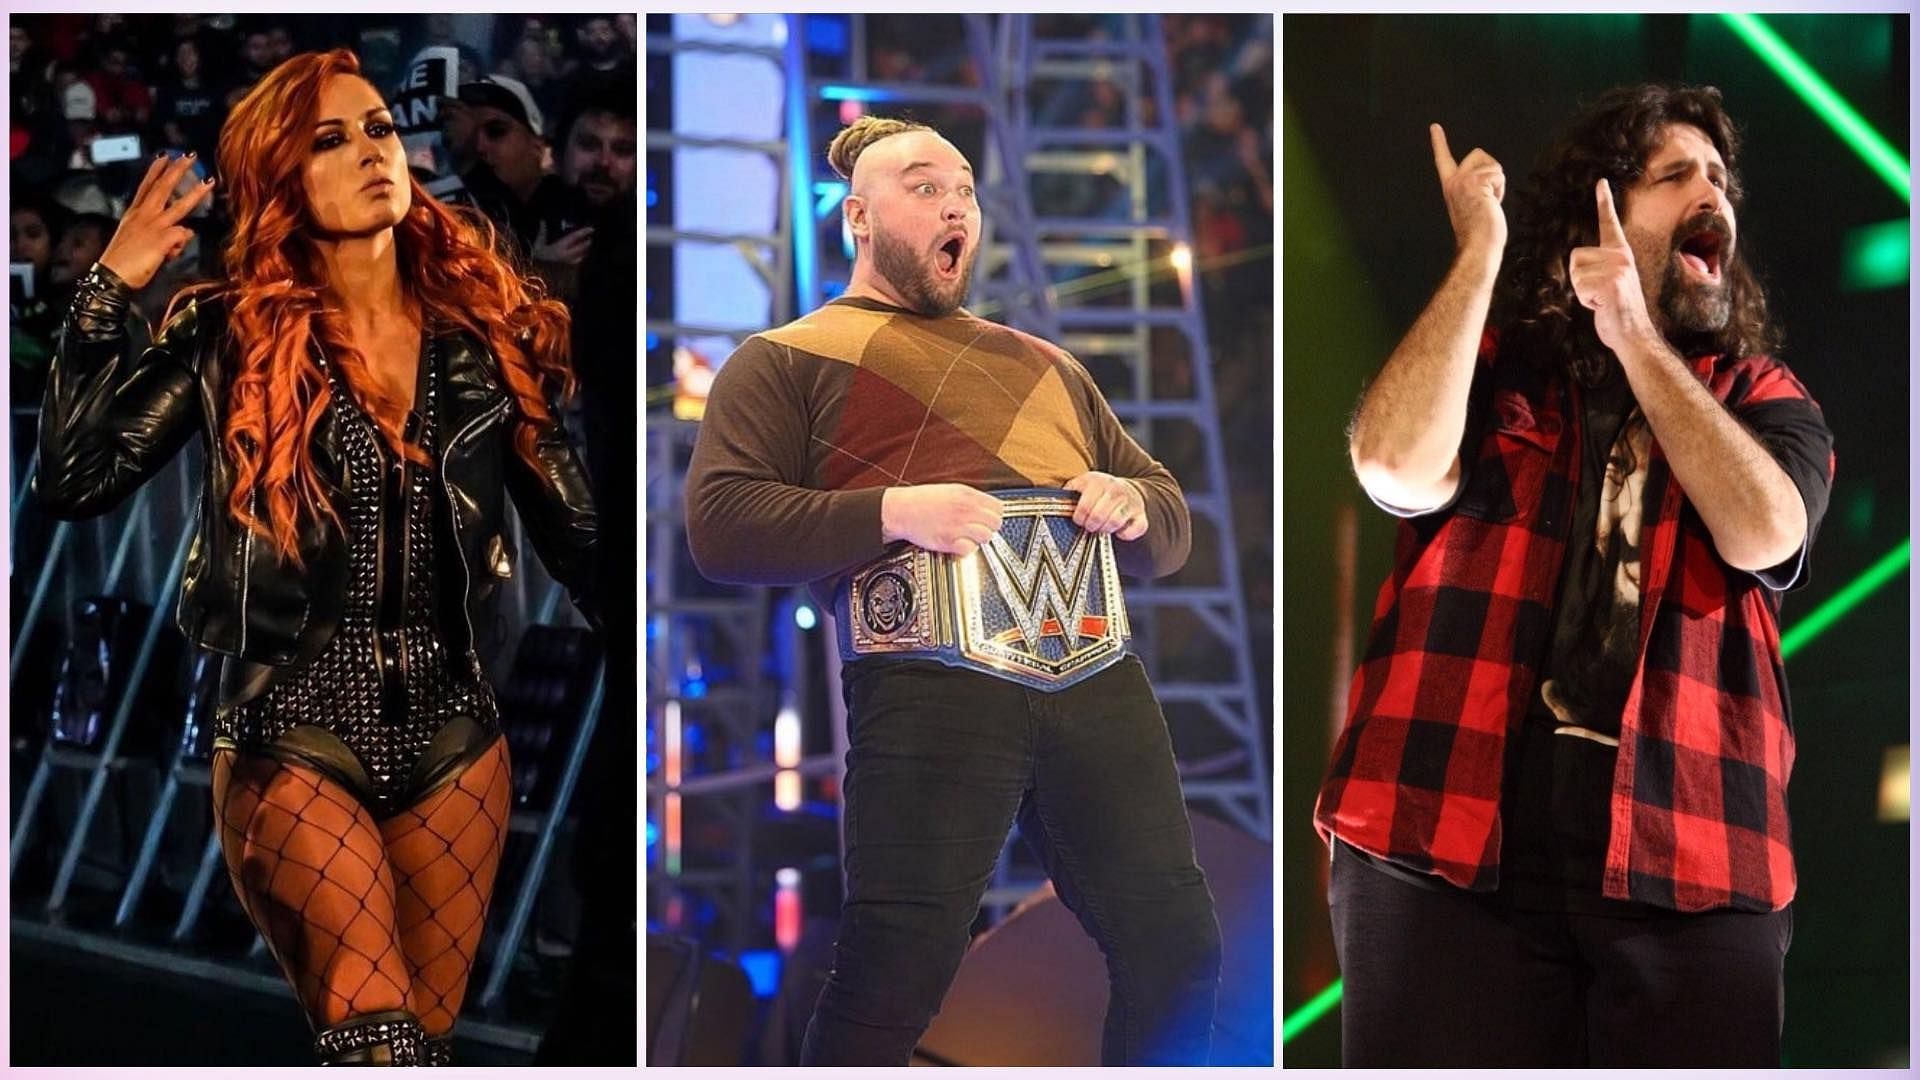 Former WWE Champion Bray Wyatt touched numerous lives before his tragic passing